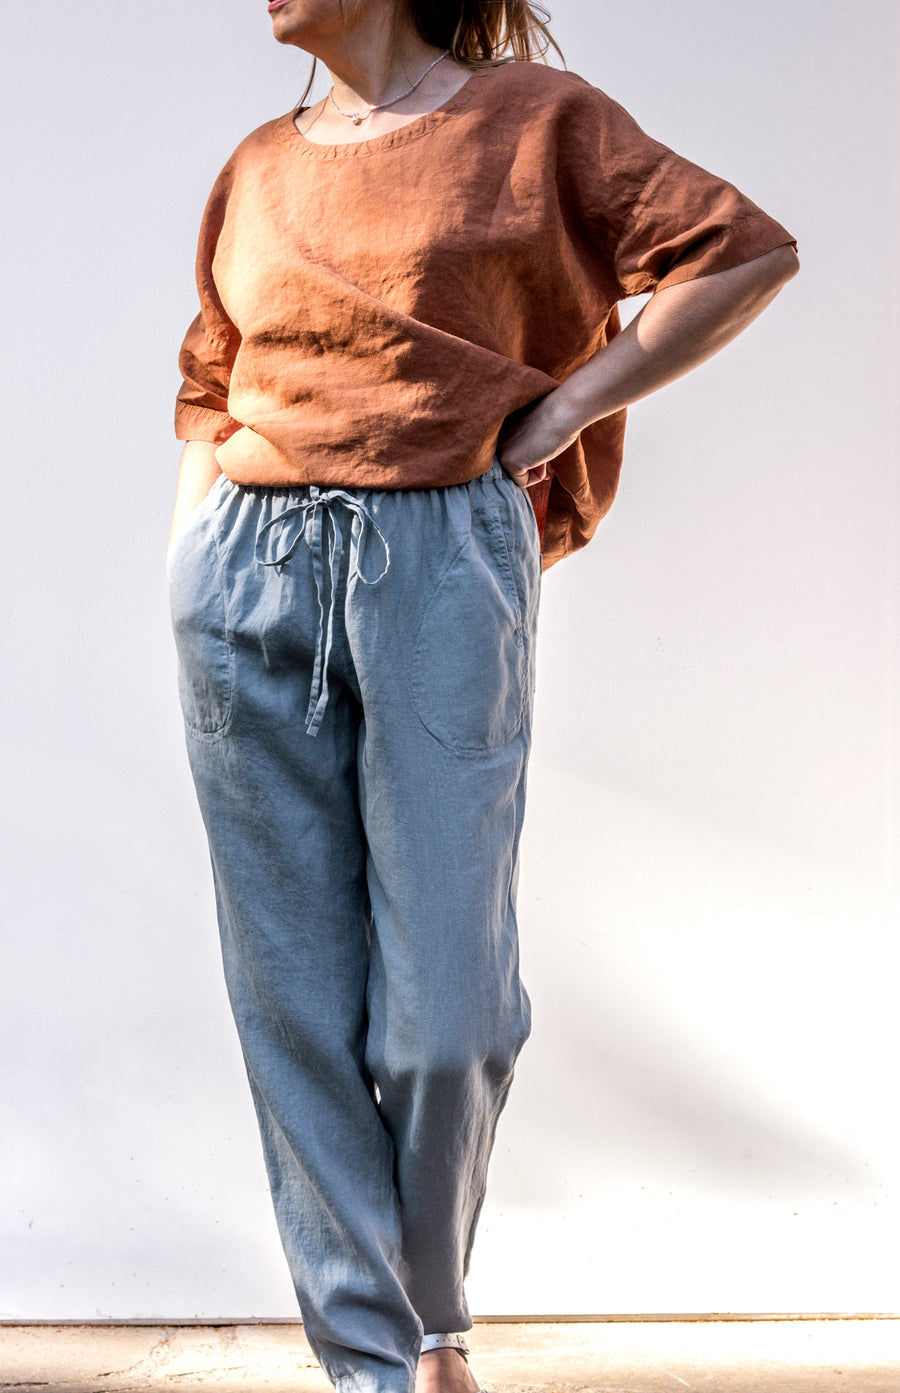 Extra fine trousers in the shade Stone Blue